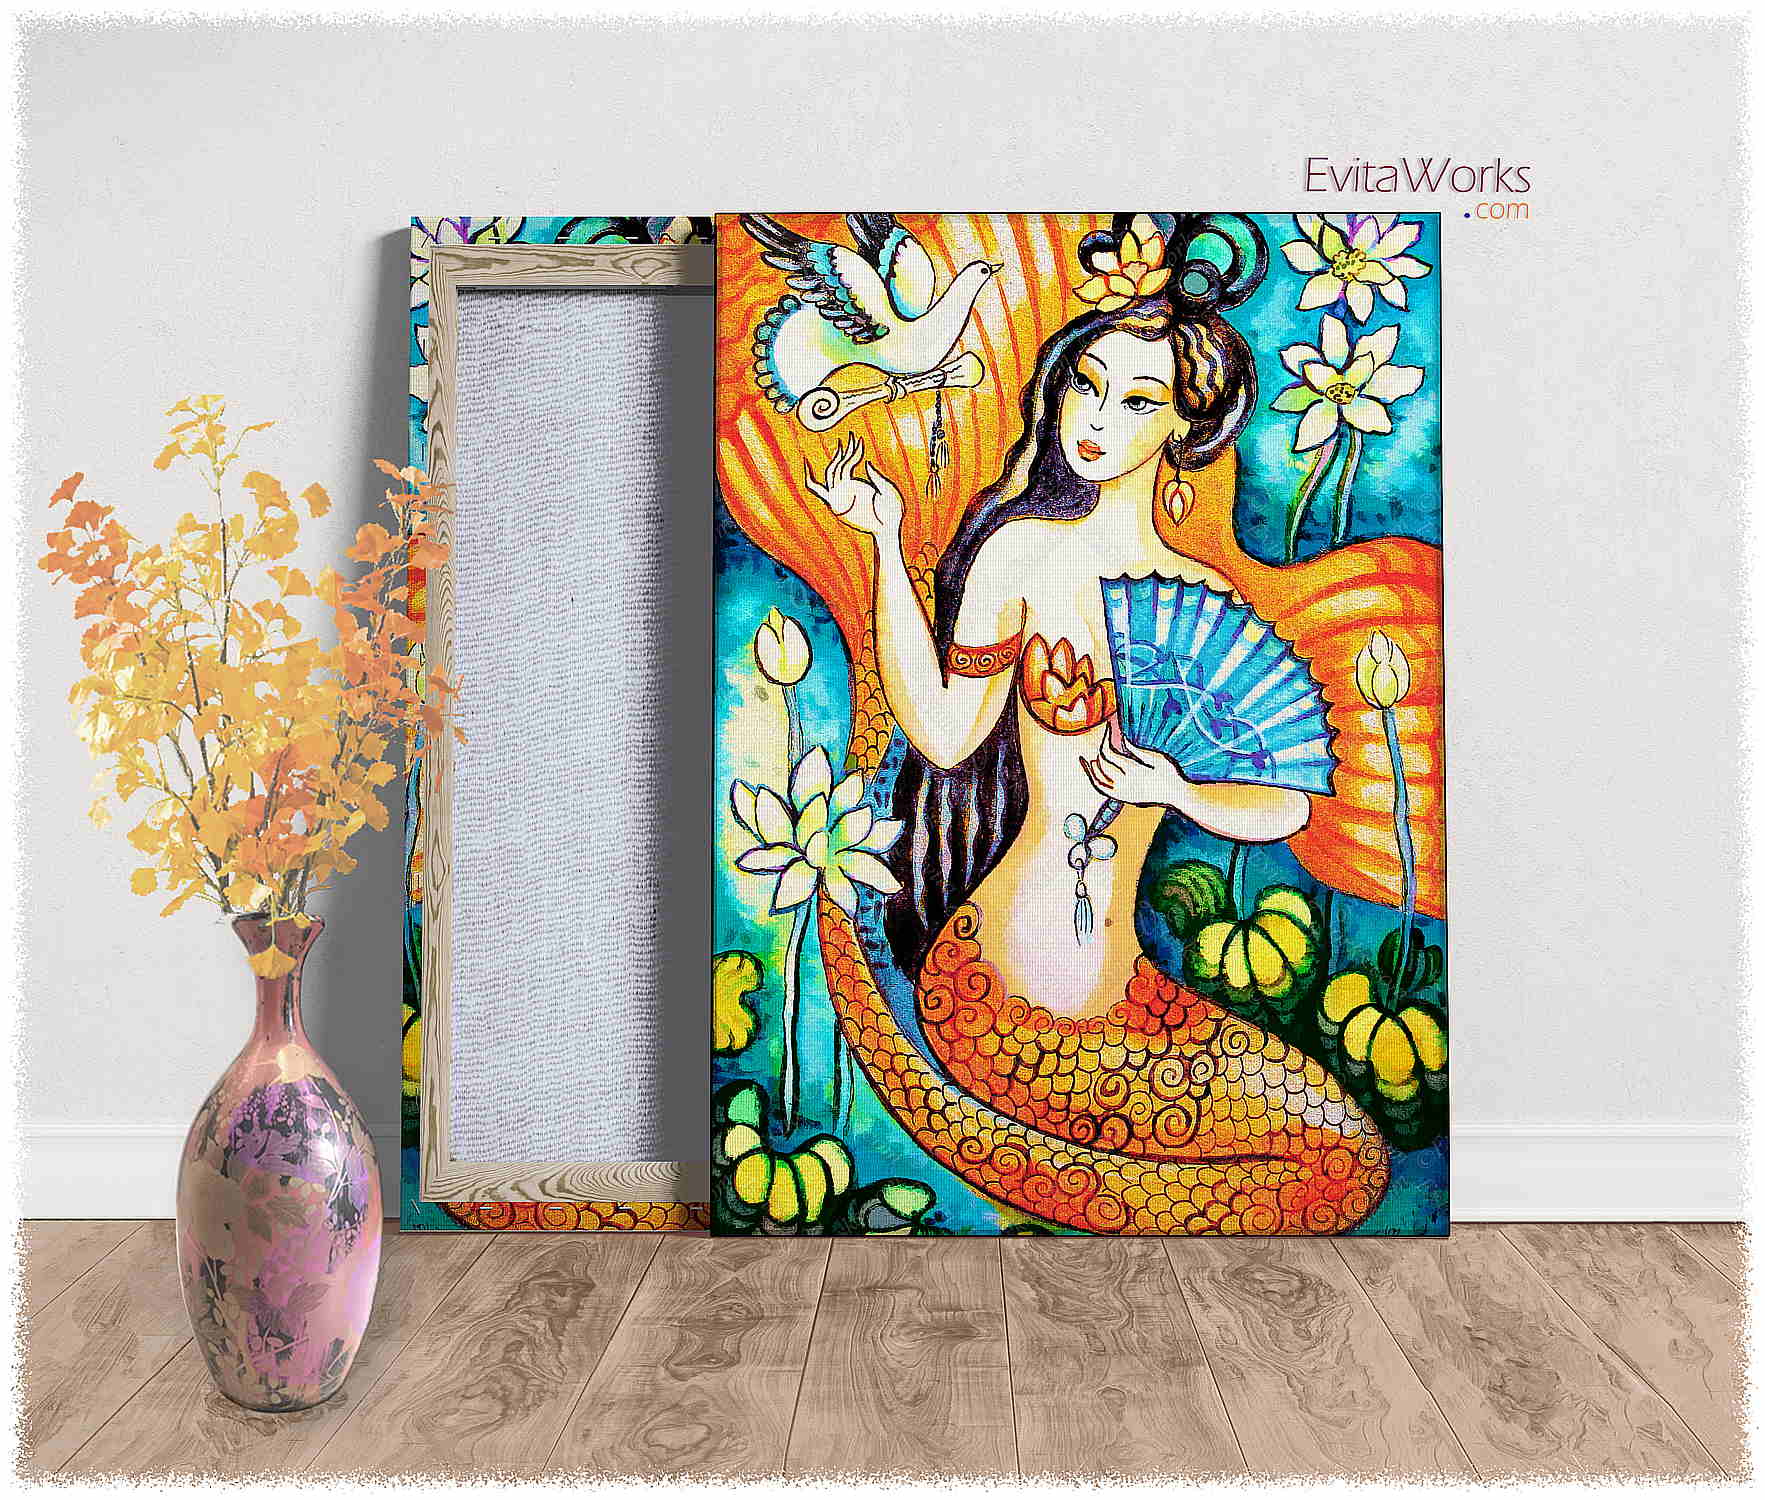 Hit to learn about "A Letter from Far Away, Asian mermaid" on canvases